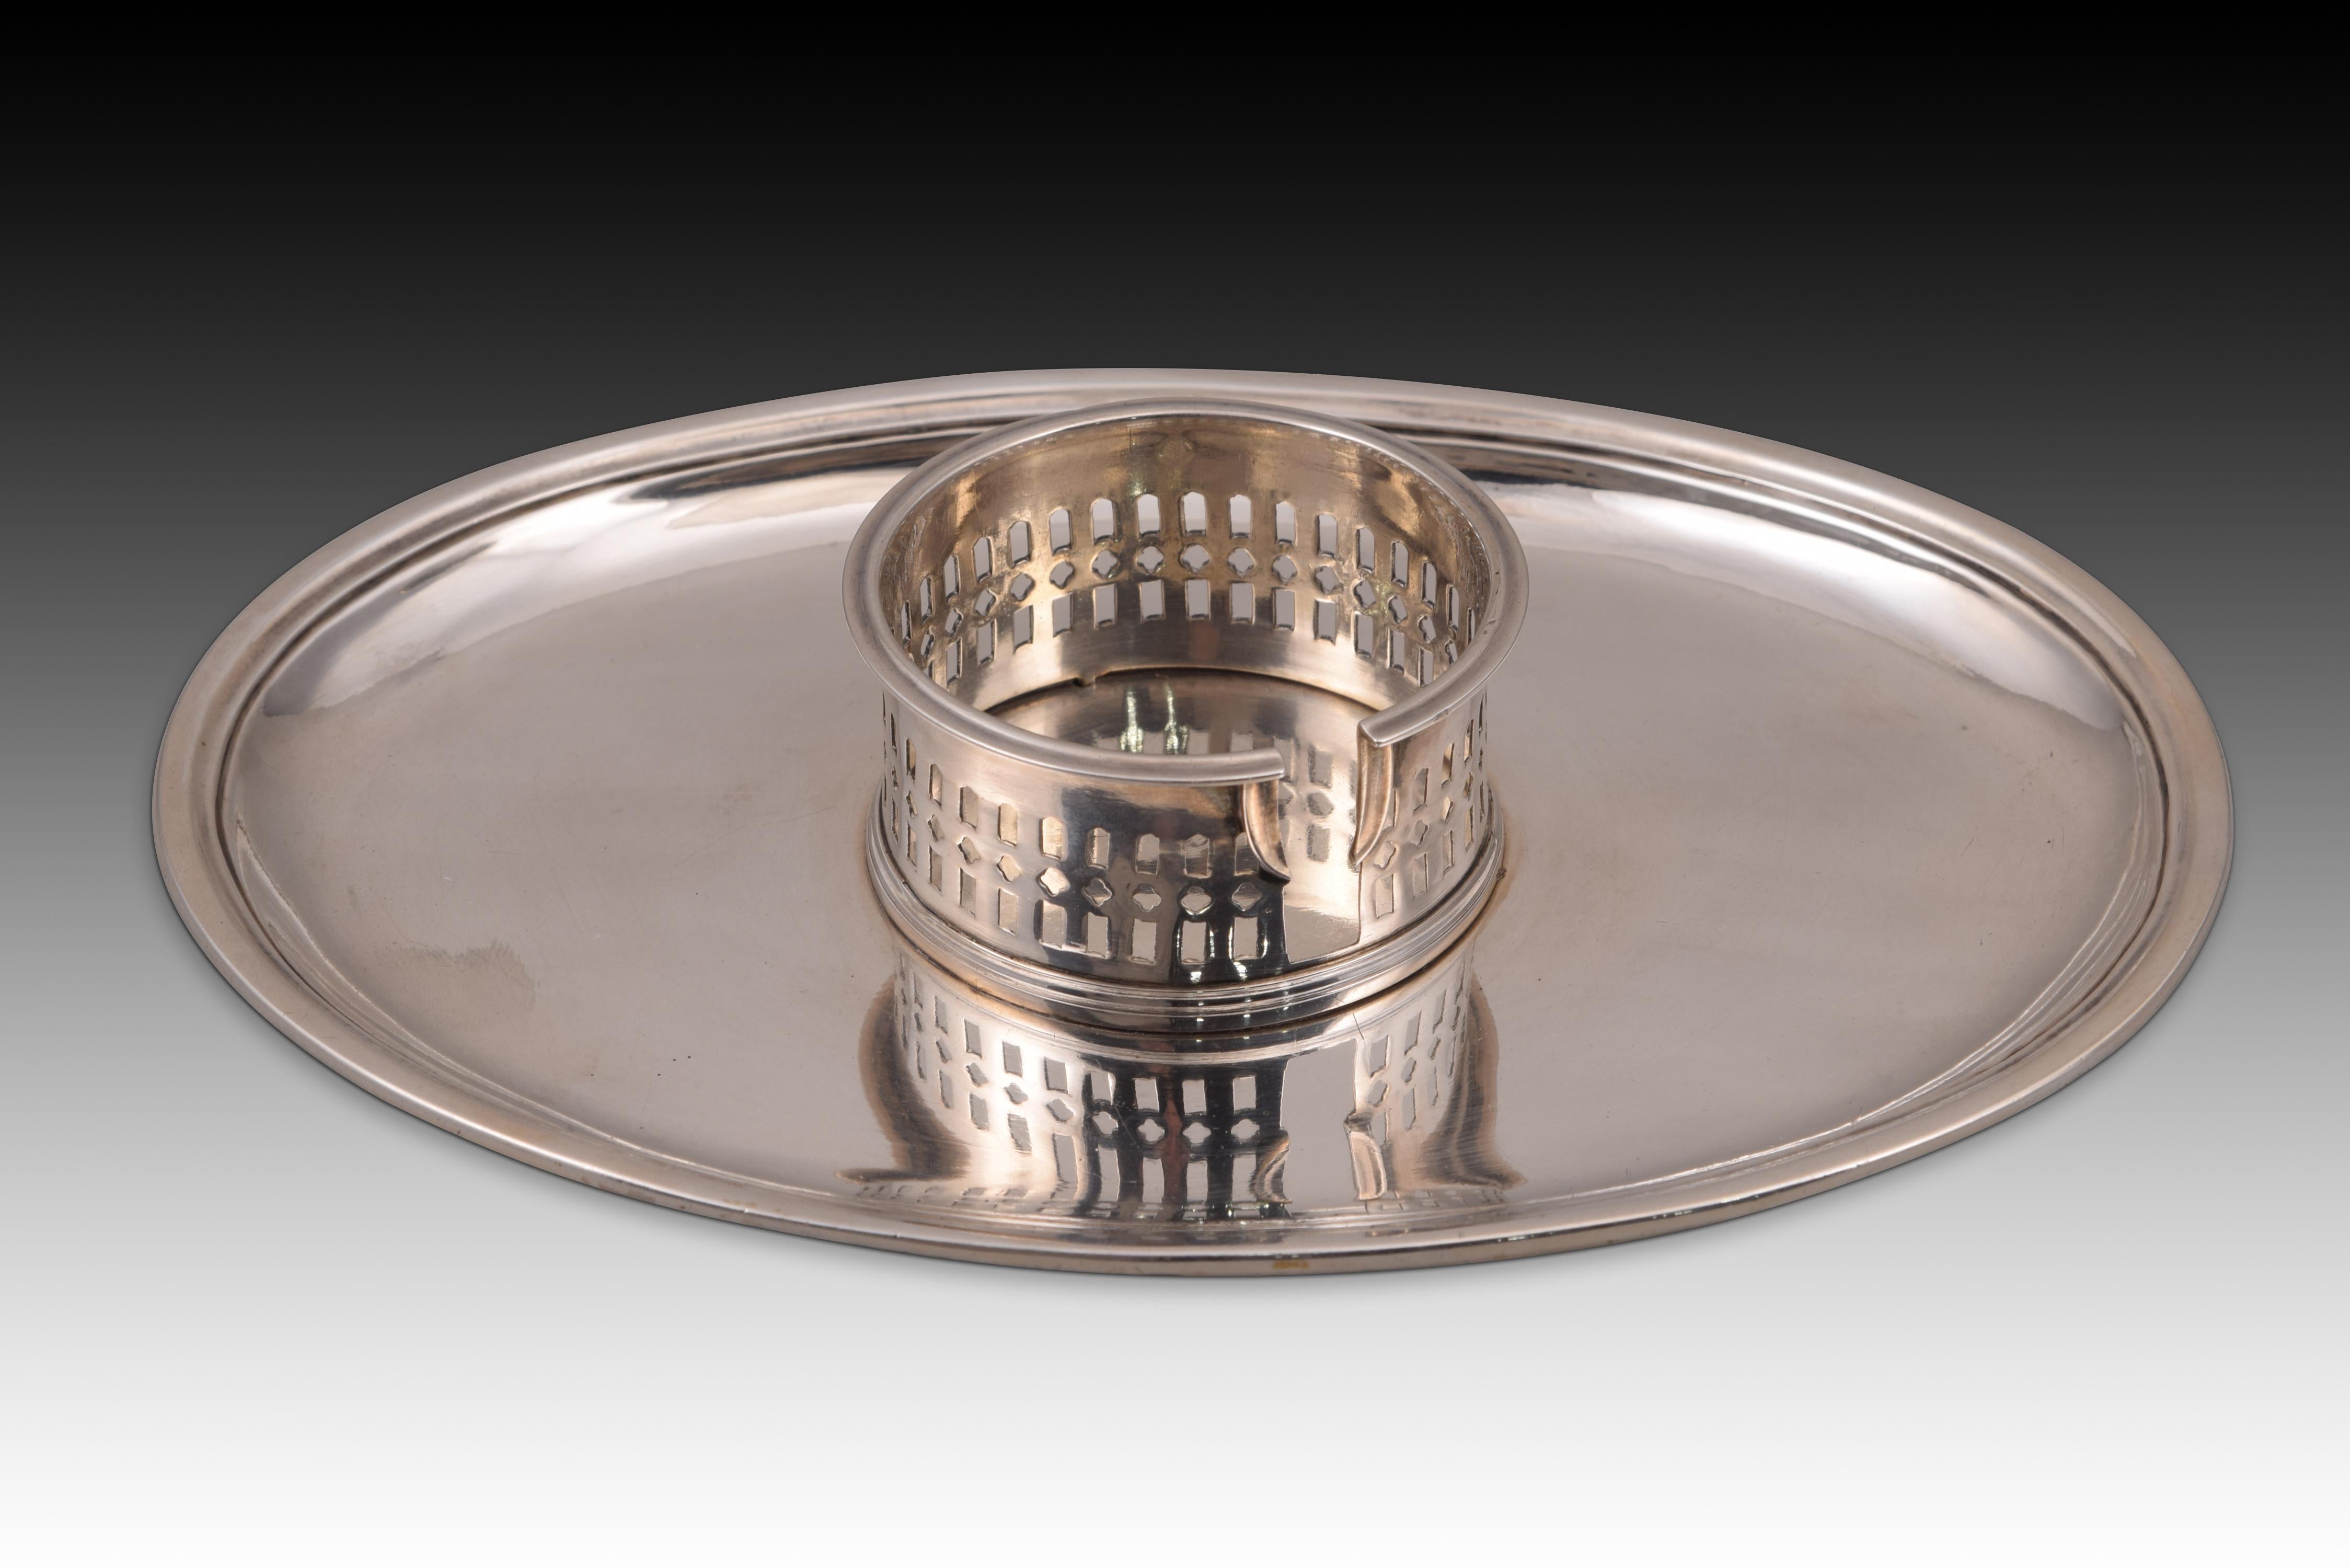 Mancerin. Silver. Spain, Madrid, 1897. 
With contrast markings. 
Silver mancerina in its color with an oval tray with a raised edge and a circular central container, openwork with geometric shapes and with enhancements on the top and bottom. It